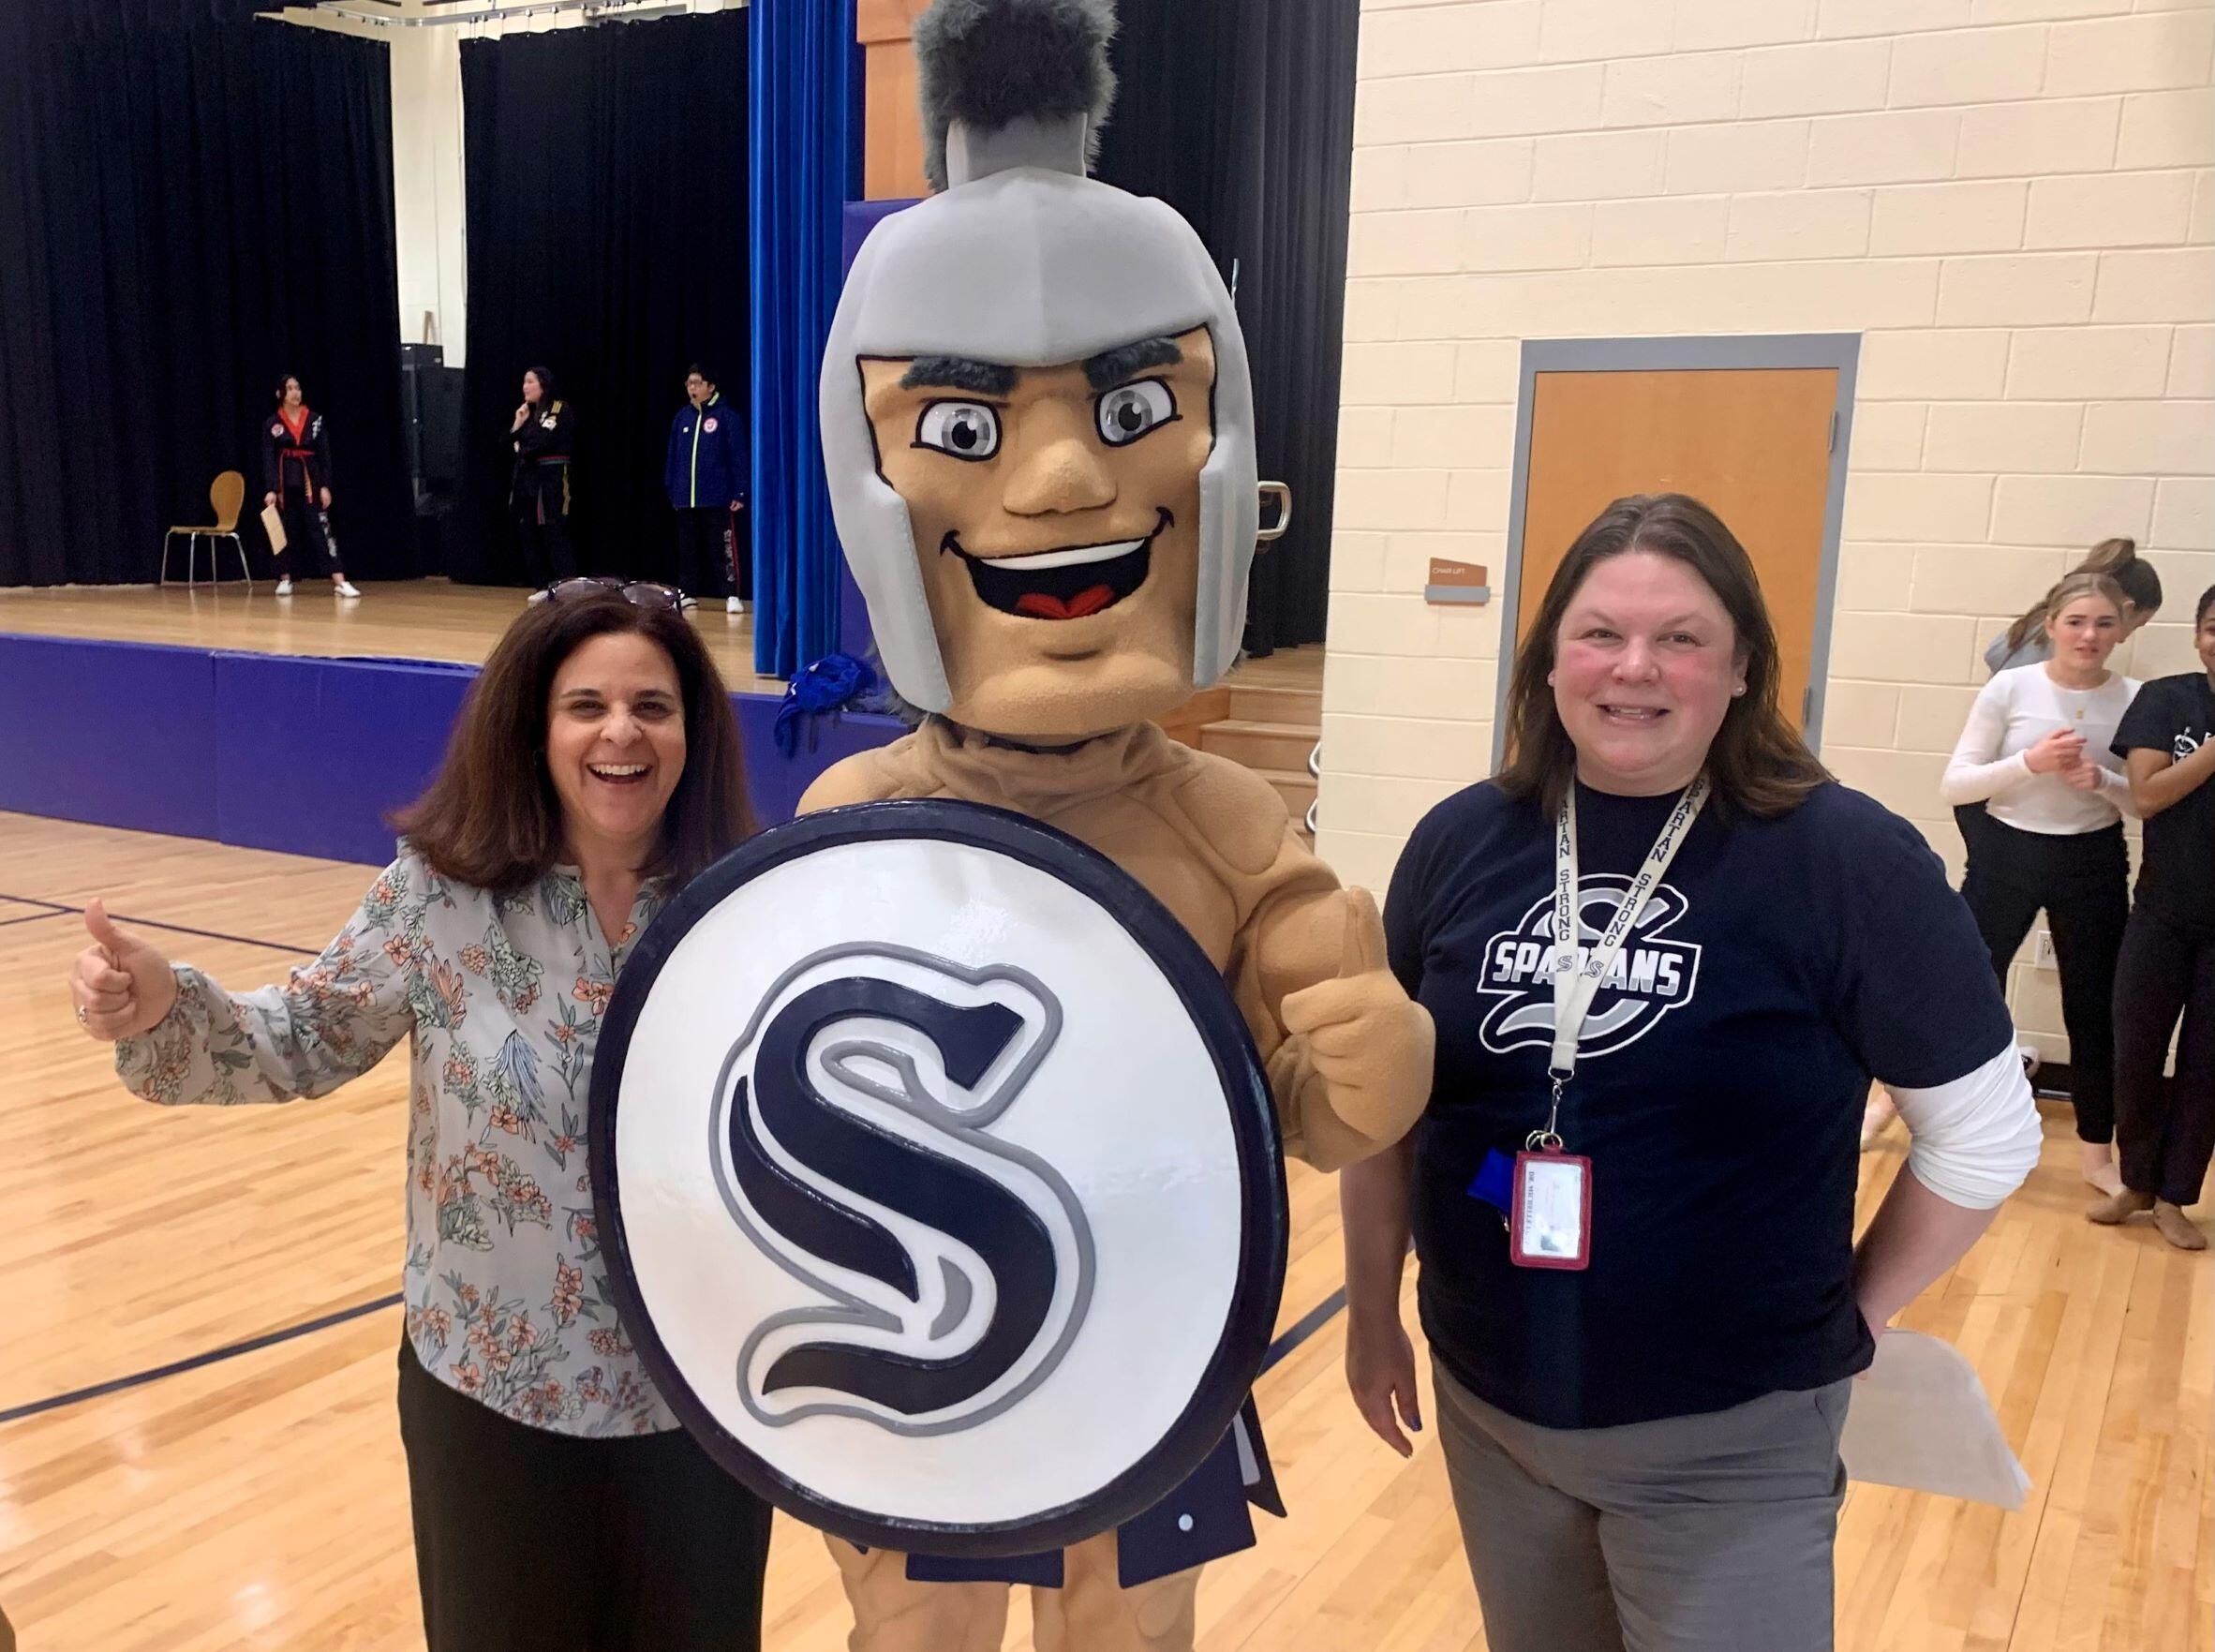 Enf- Dr. Yannacone and Dr. Lutz standing with the Spartan Mascot